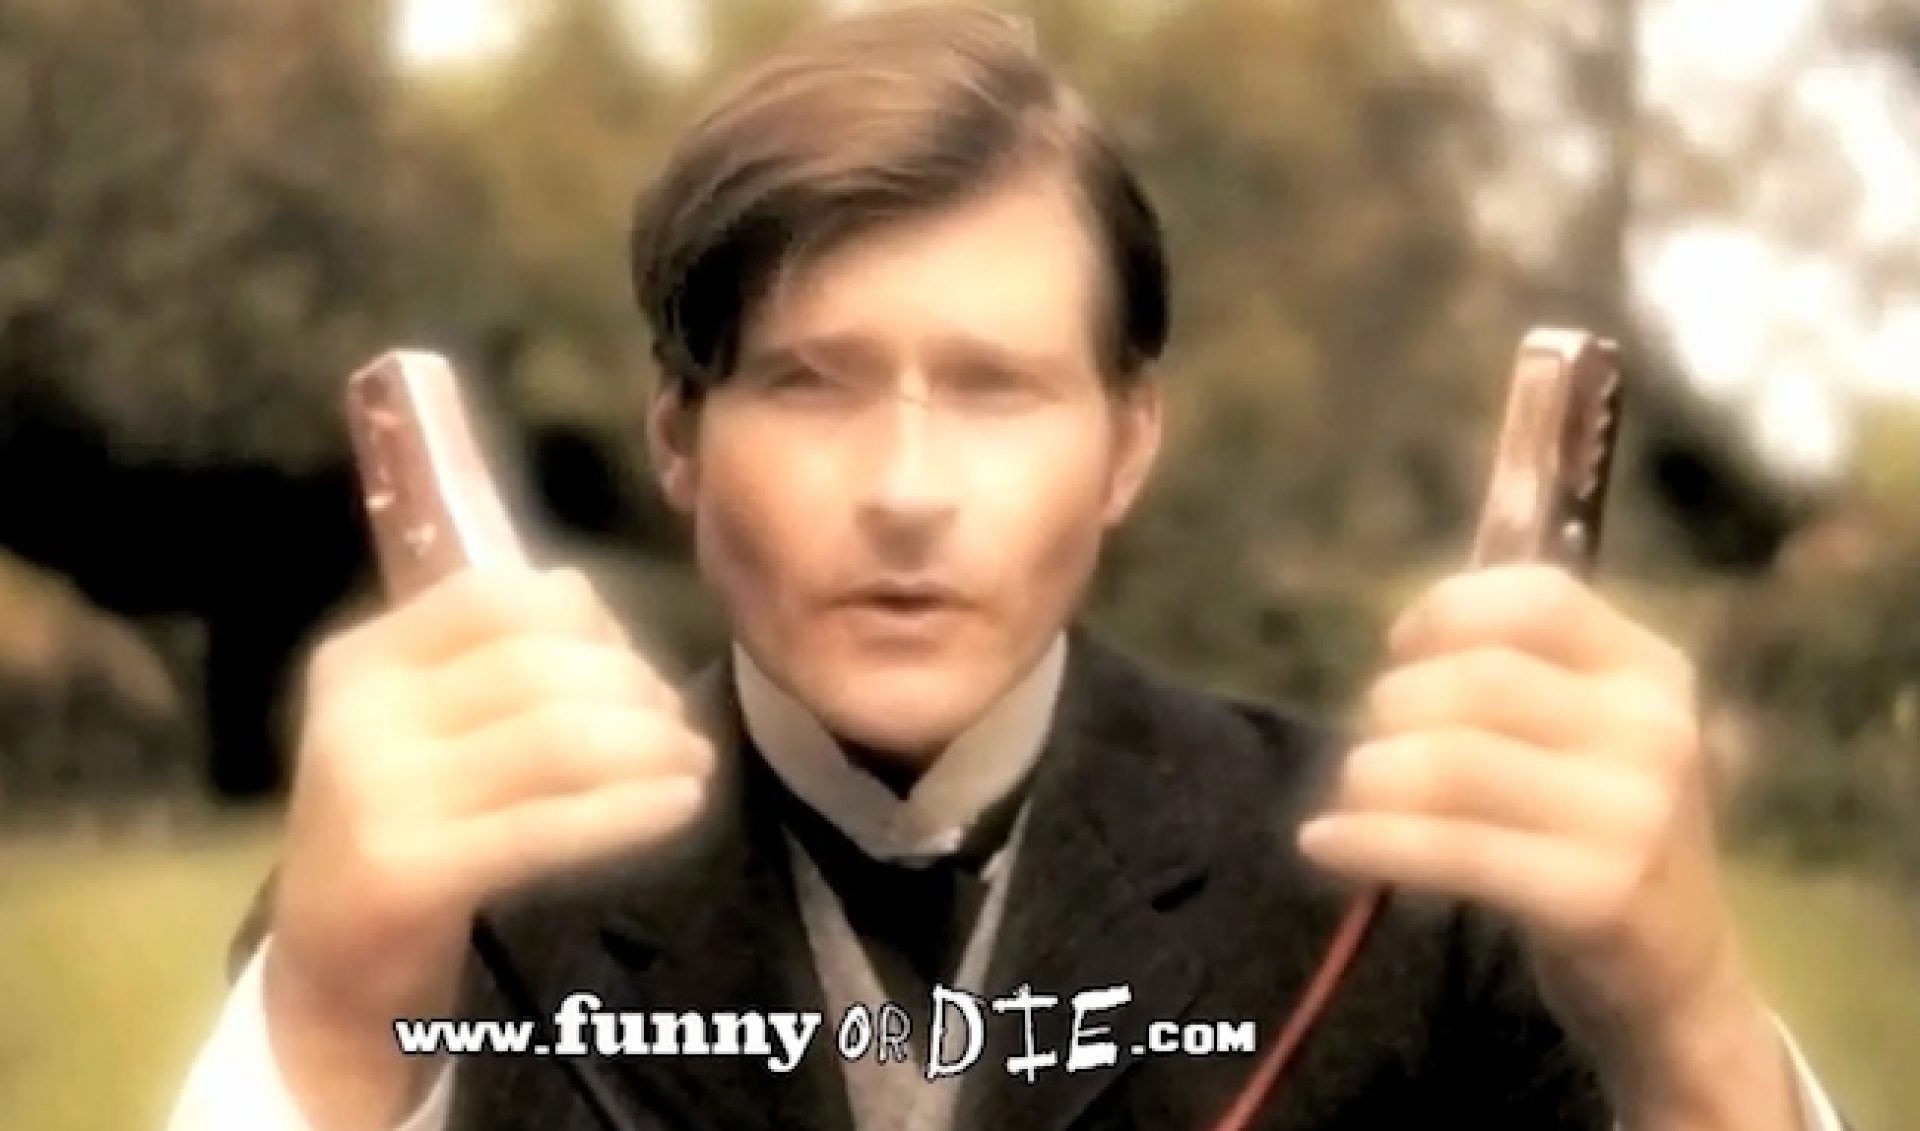 Funny or Die's 'Drunk History' Picked up by Comedy Central - Tubefilter